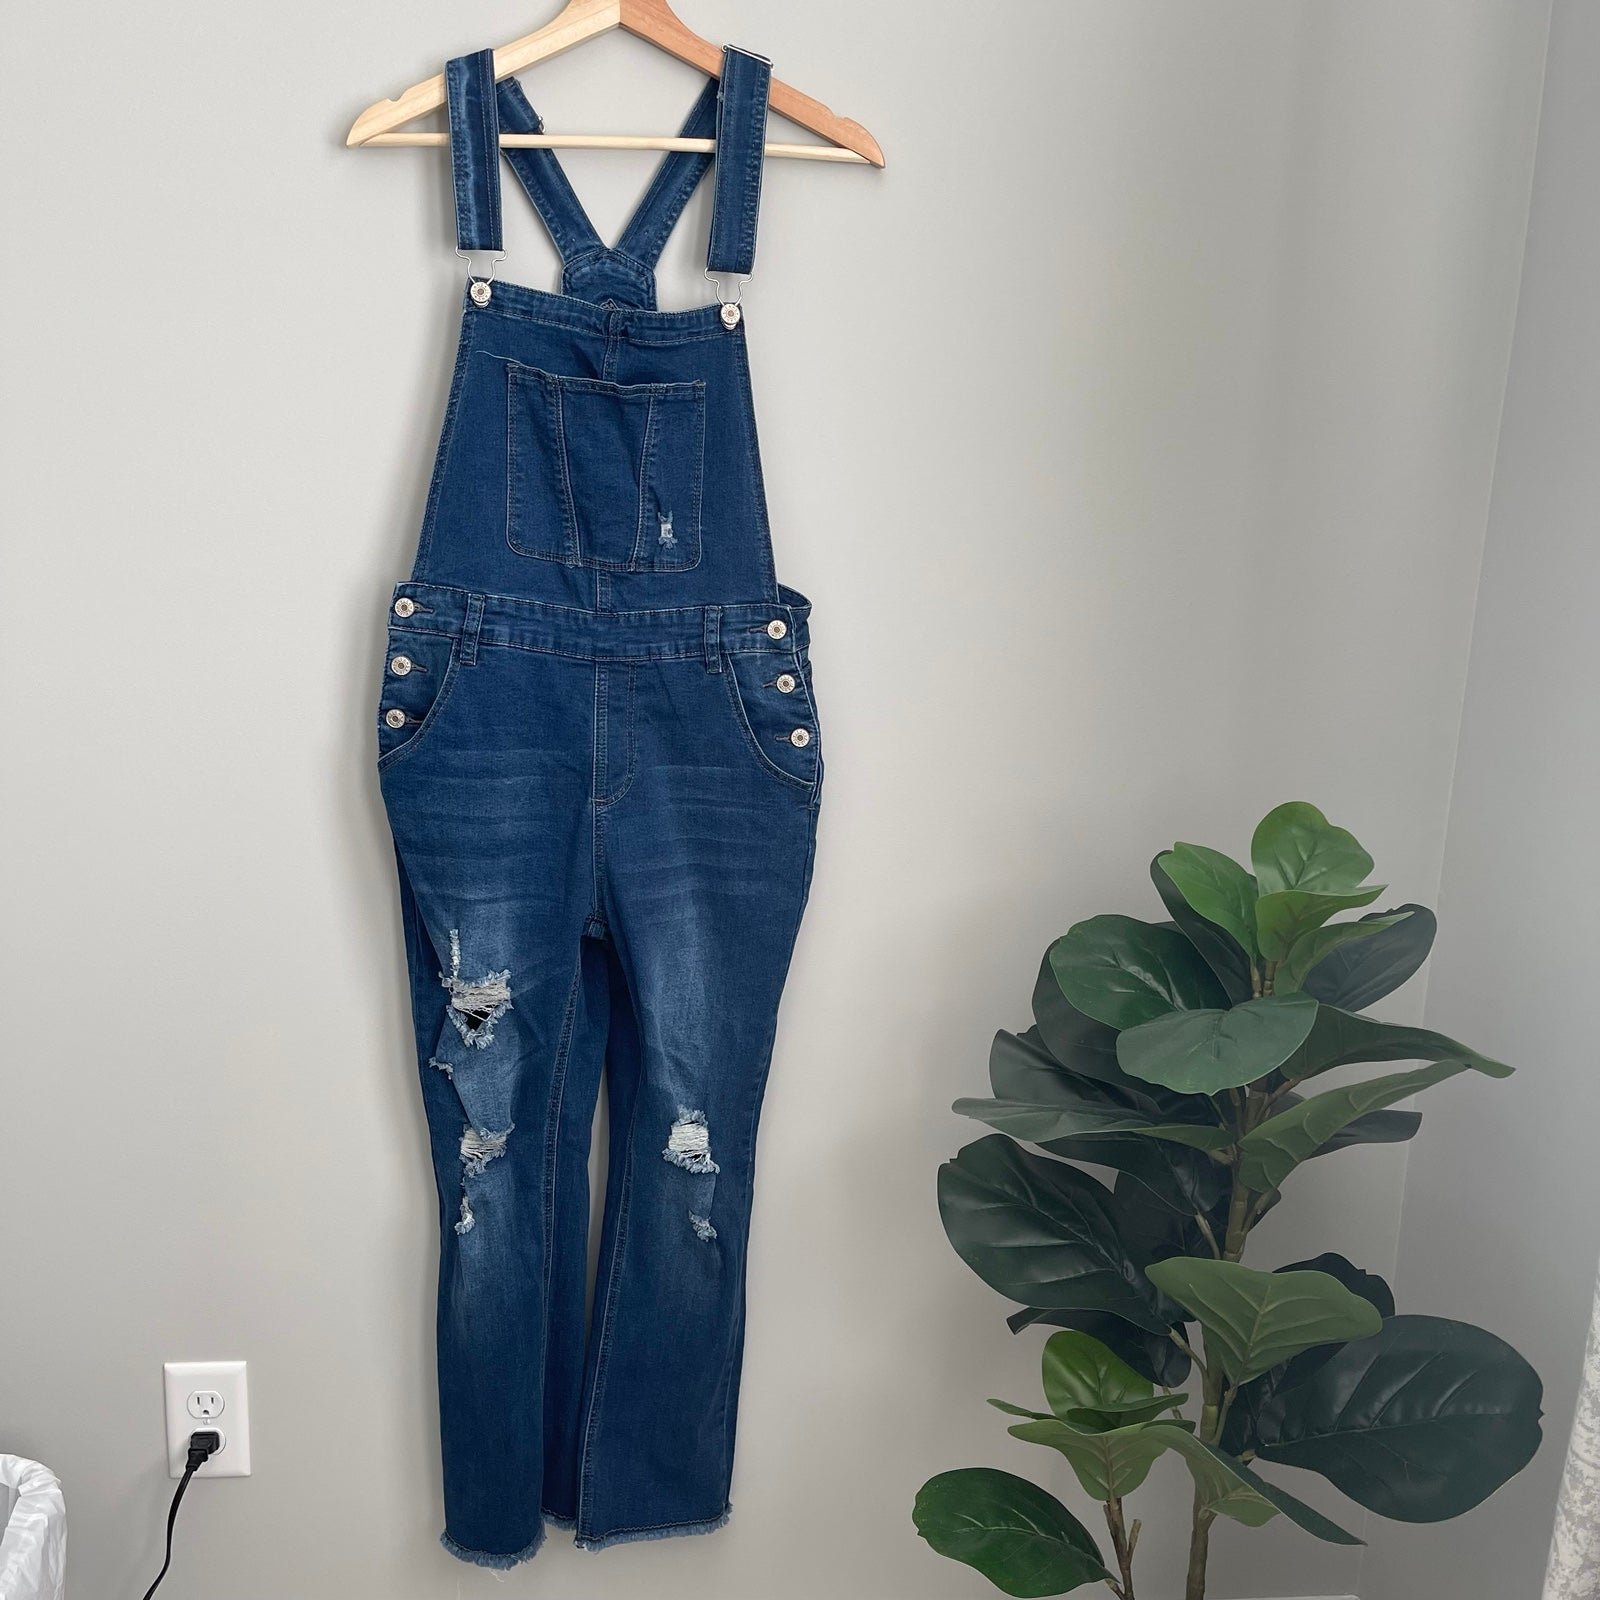 Affordable Distressed Jean Bib Overalls Small iuGXc65ac online store